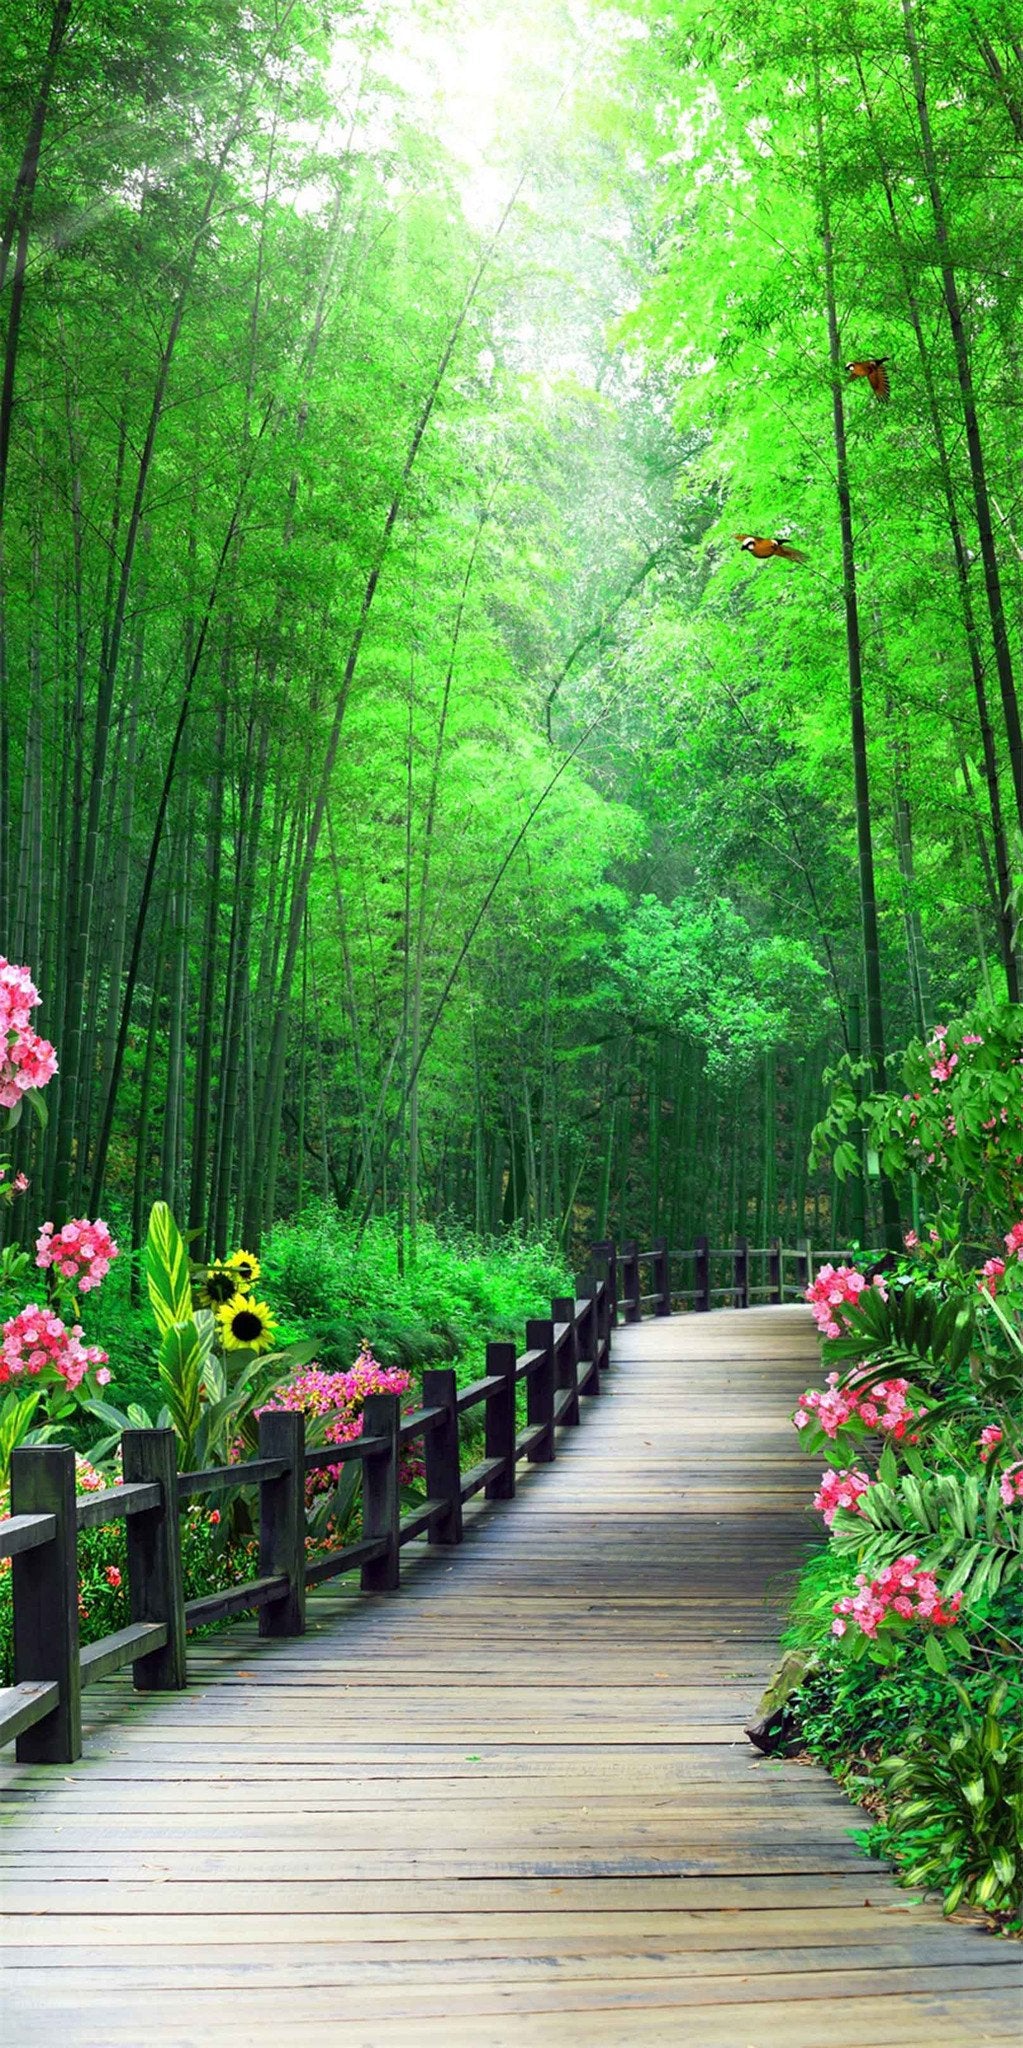 3D Bamboo Forest Wood Road 941 Stair Risers Wallpaper AJ Wallpaper 